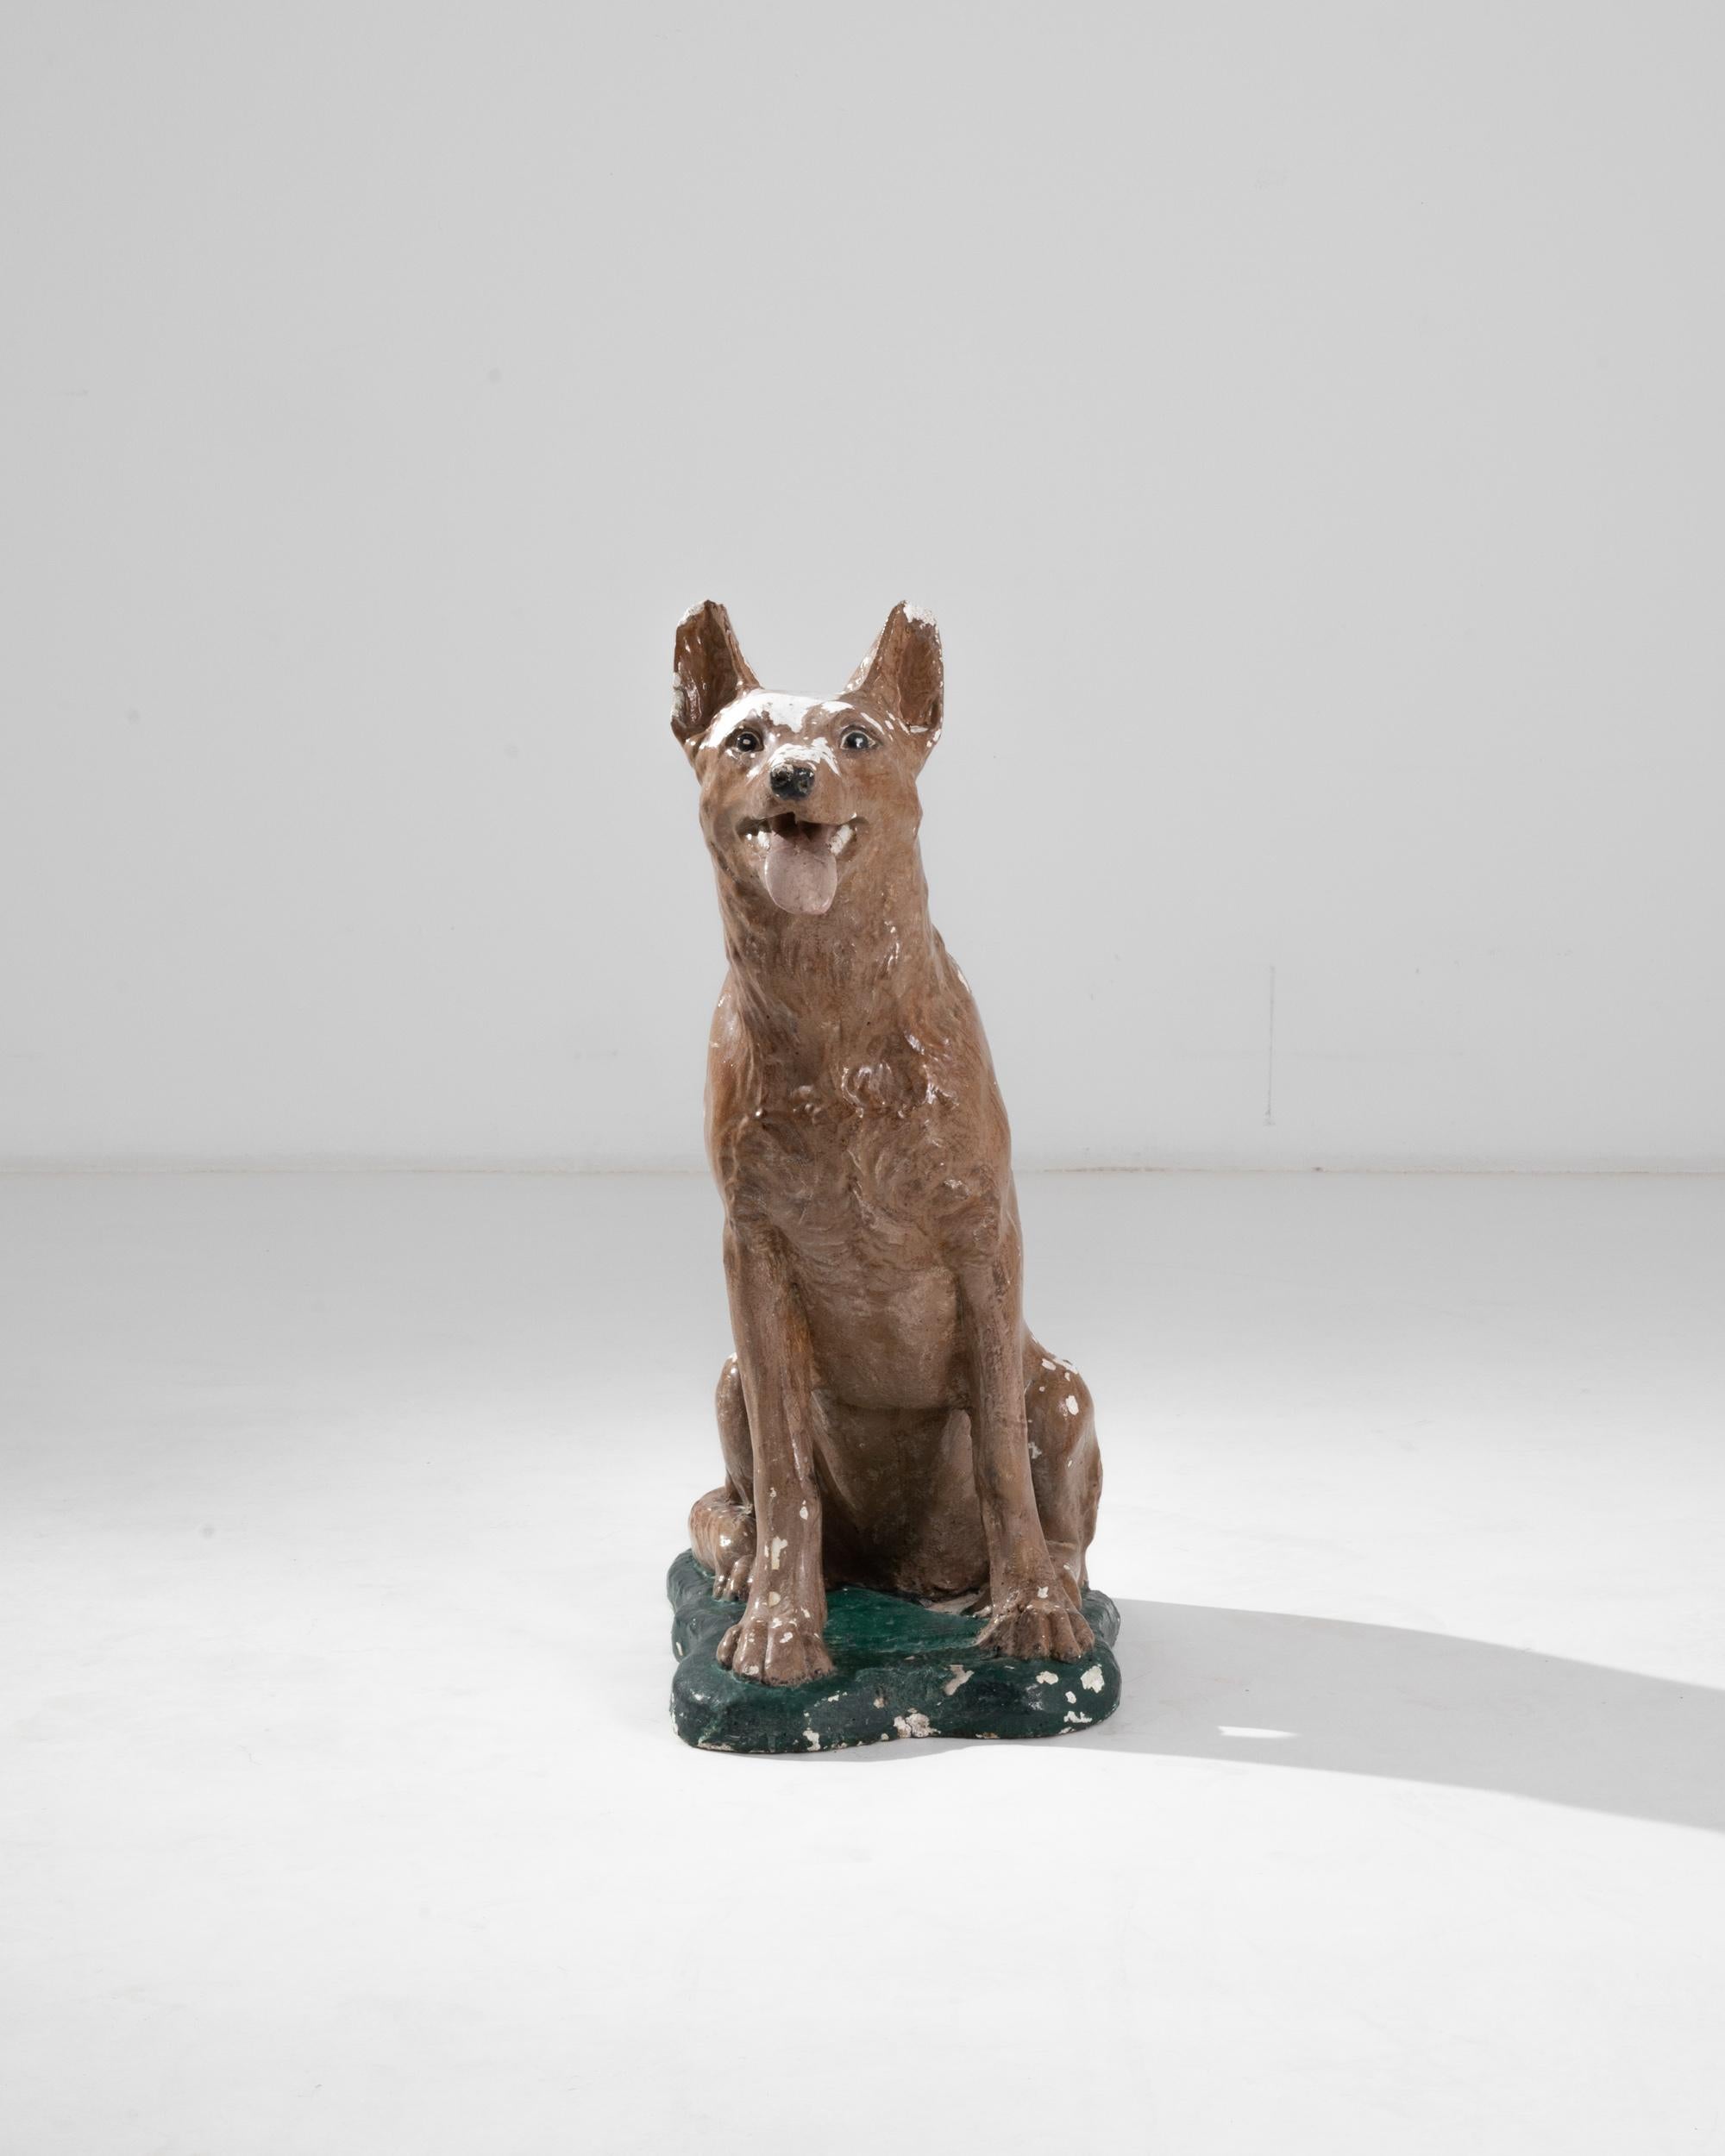 A vintage ceramic sculpture depicting a German Shepherd, seated attentively on its haunches. Made in France in the 20th century, the piece is roughly life-sized and painted with loving attention to detail. Though the colorful surface has weathered